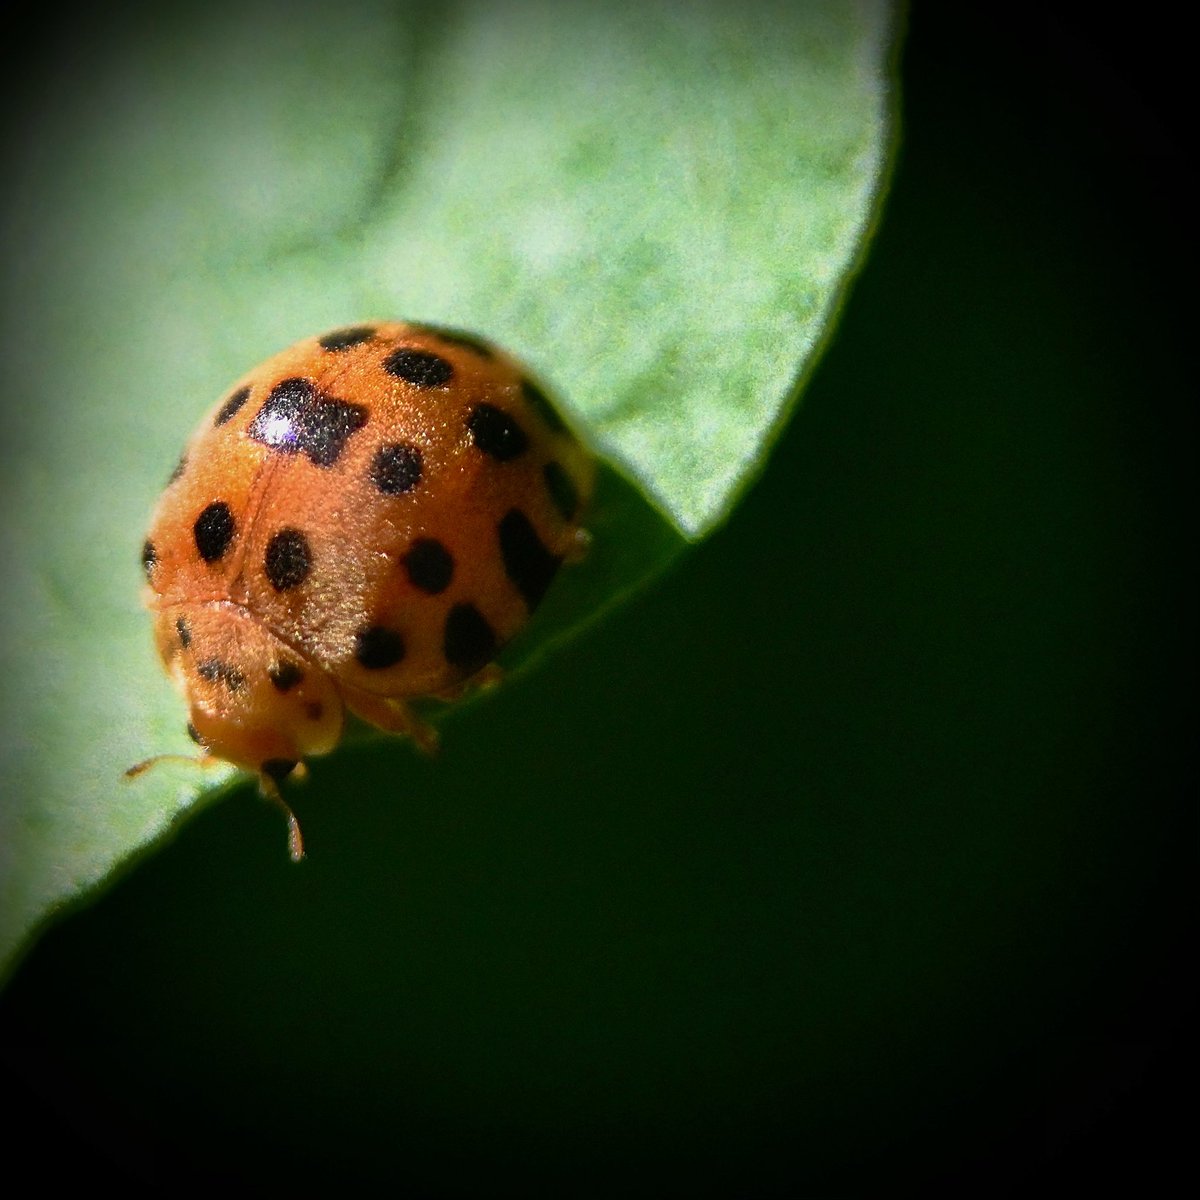 Spring Day 47 - Always nice to meet another hairy lady in the garden 😃🐞  #28spottedladybird #macrophotography #ladybug_macro #ladybird #insect #gardening #gardeningaustralia #abcmygarden #insect #macro #nature #insects #macrophotography #insectphotography #abcmyphoto